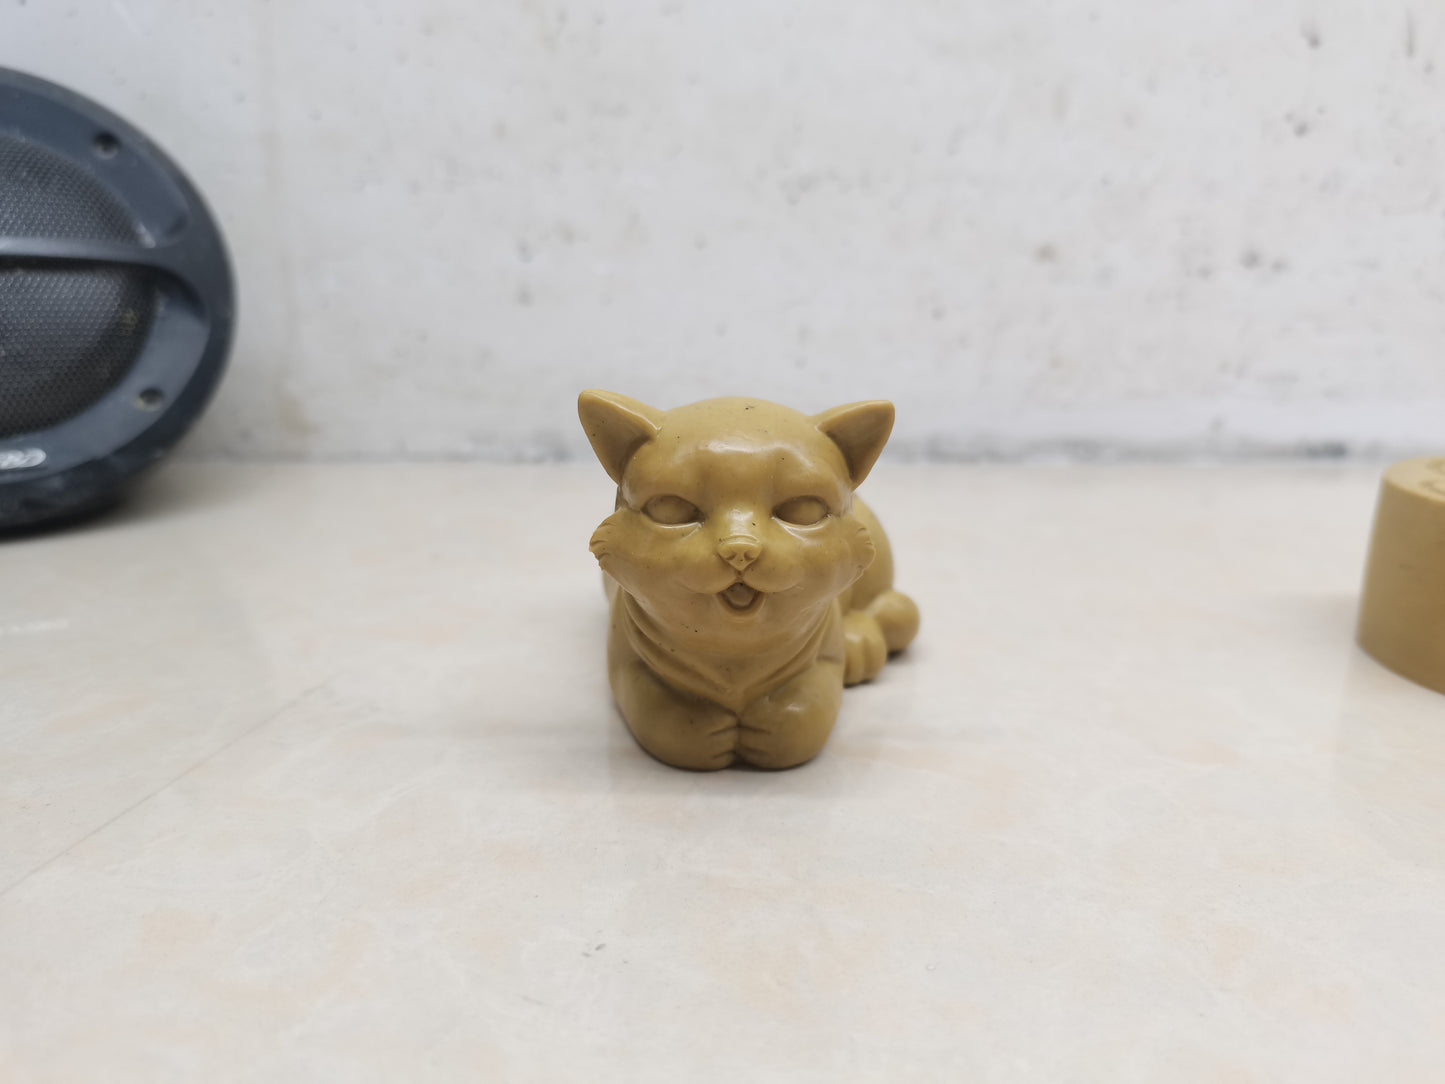 [Earlybird Price] 2 [Cat lying down] Porcelain Toilet Bolt Covers